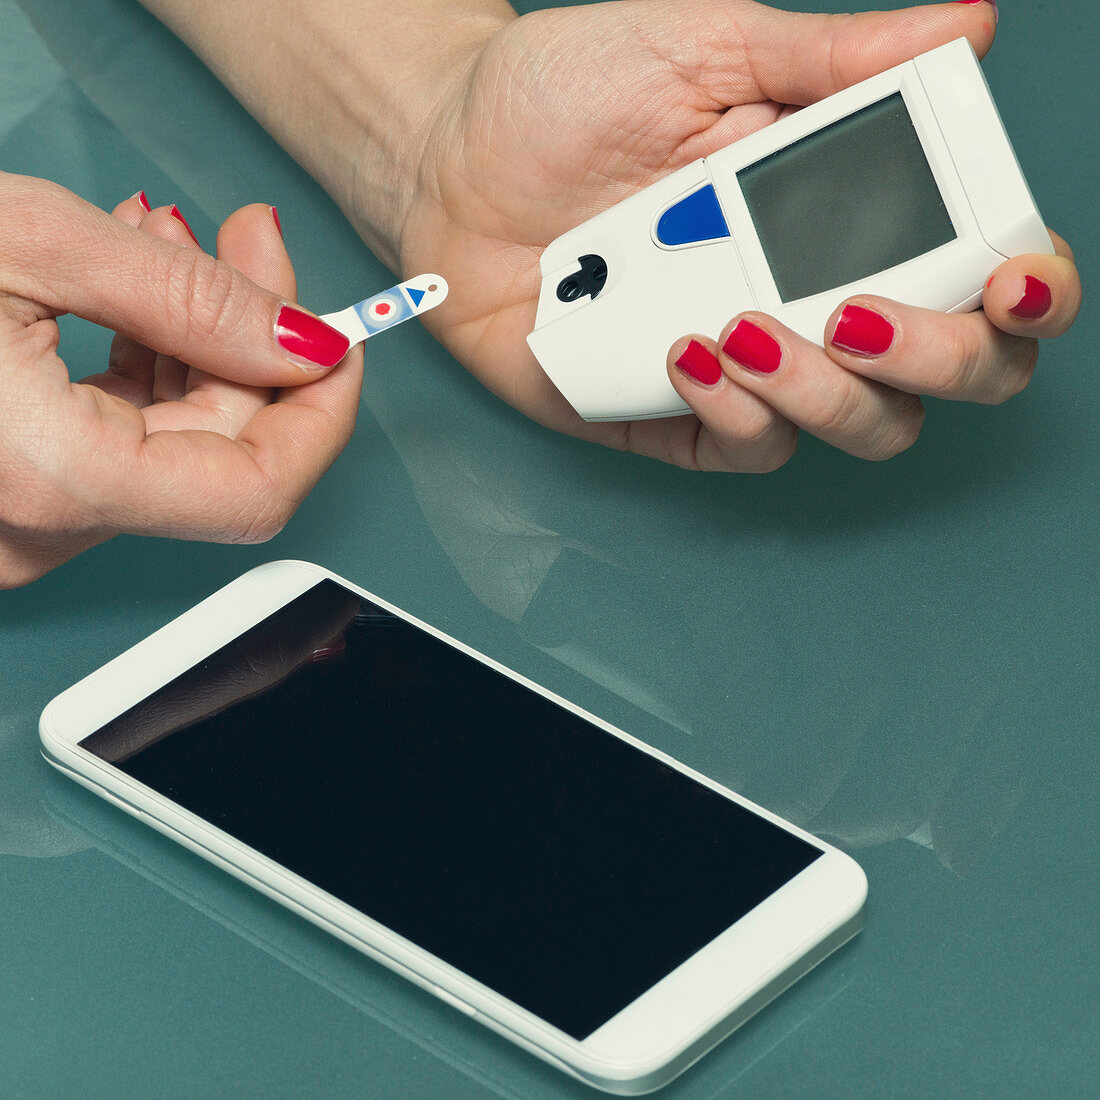 Personal blood glucose meter